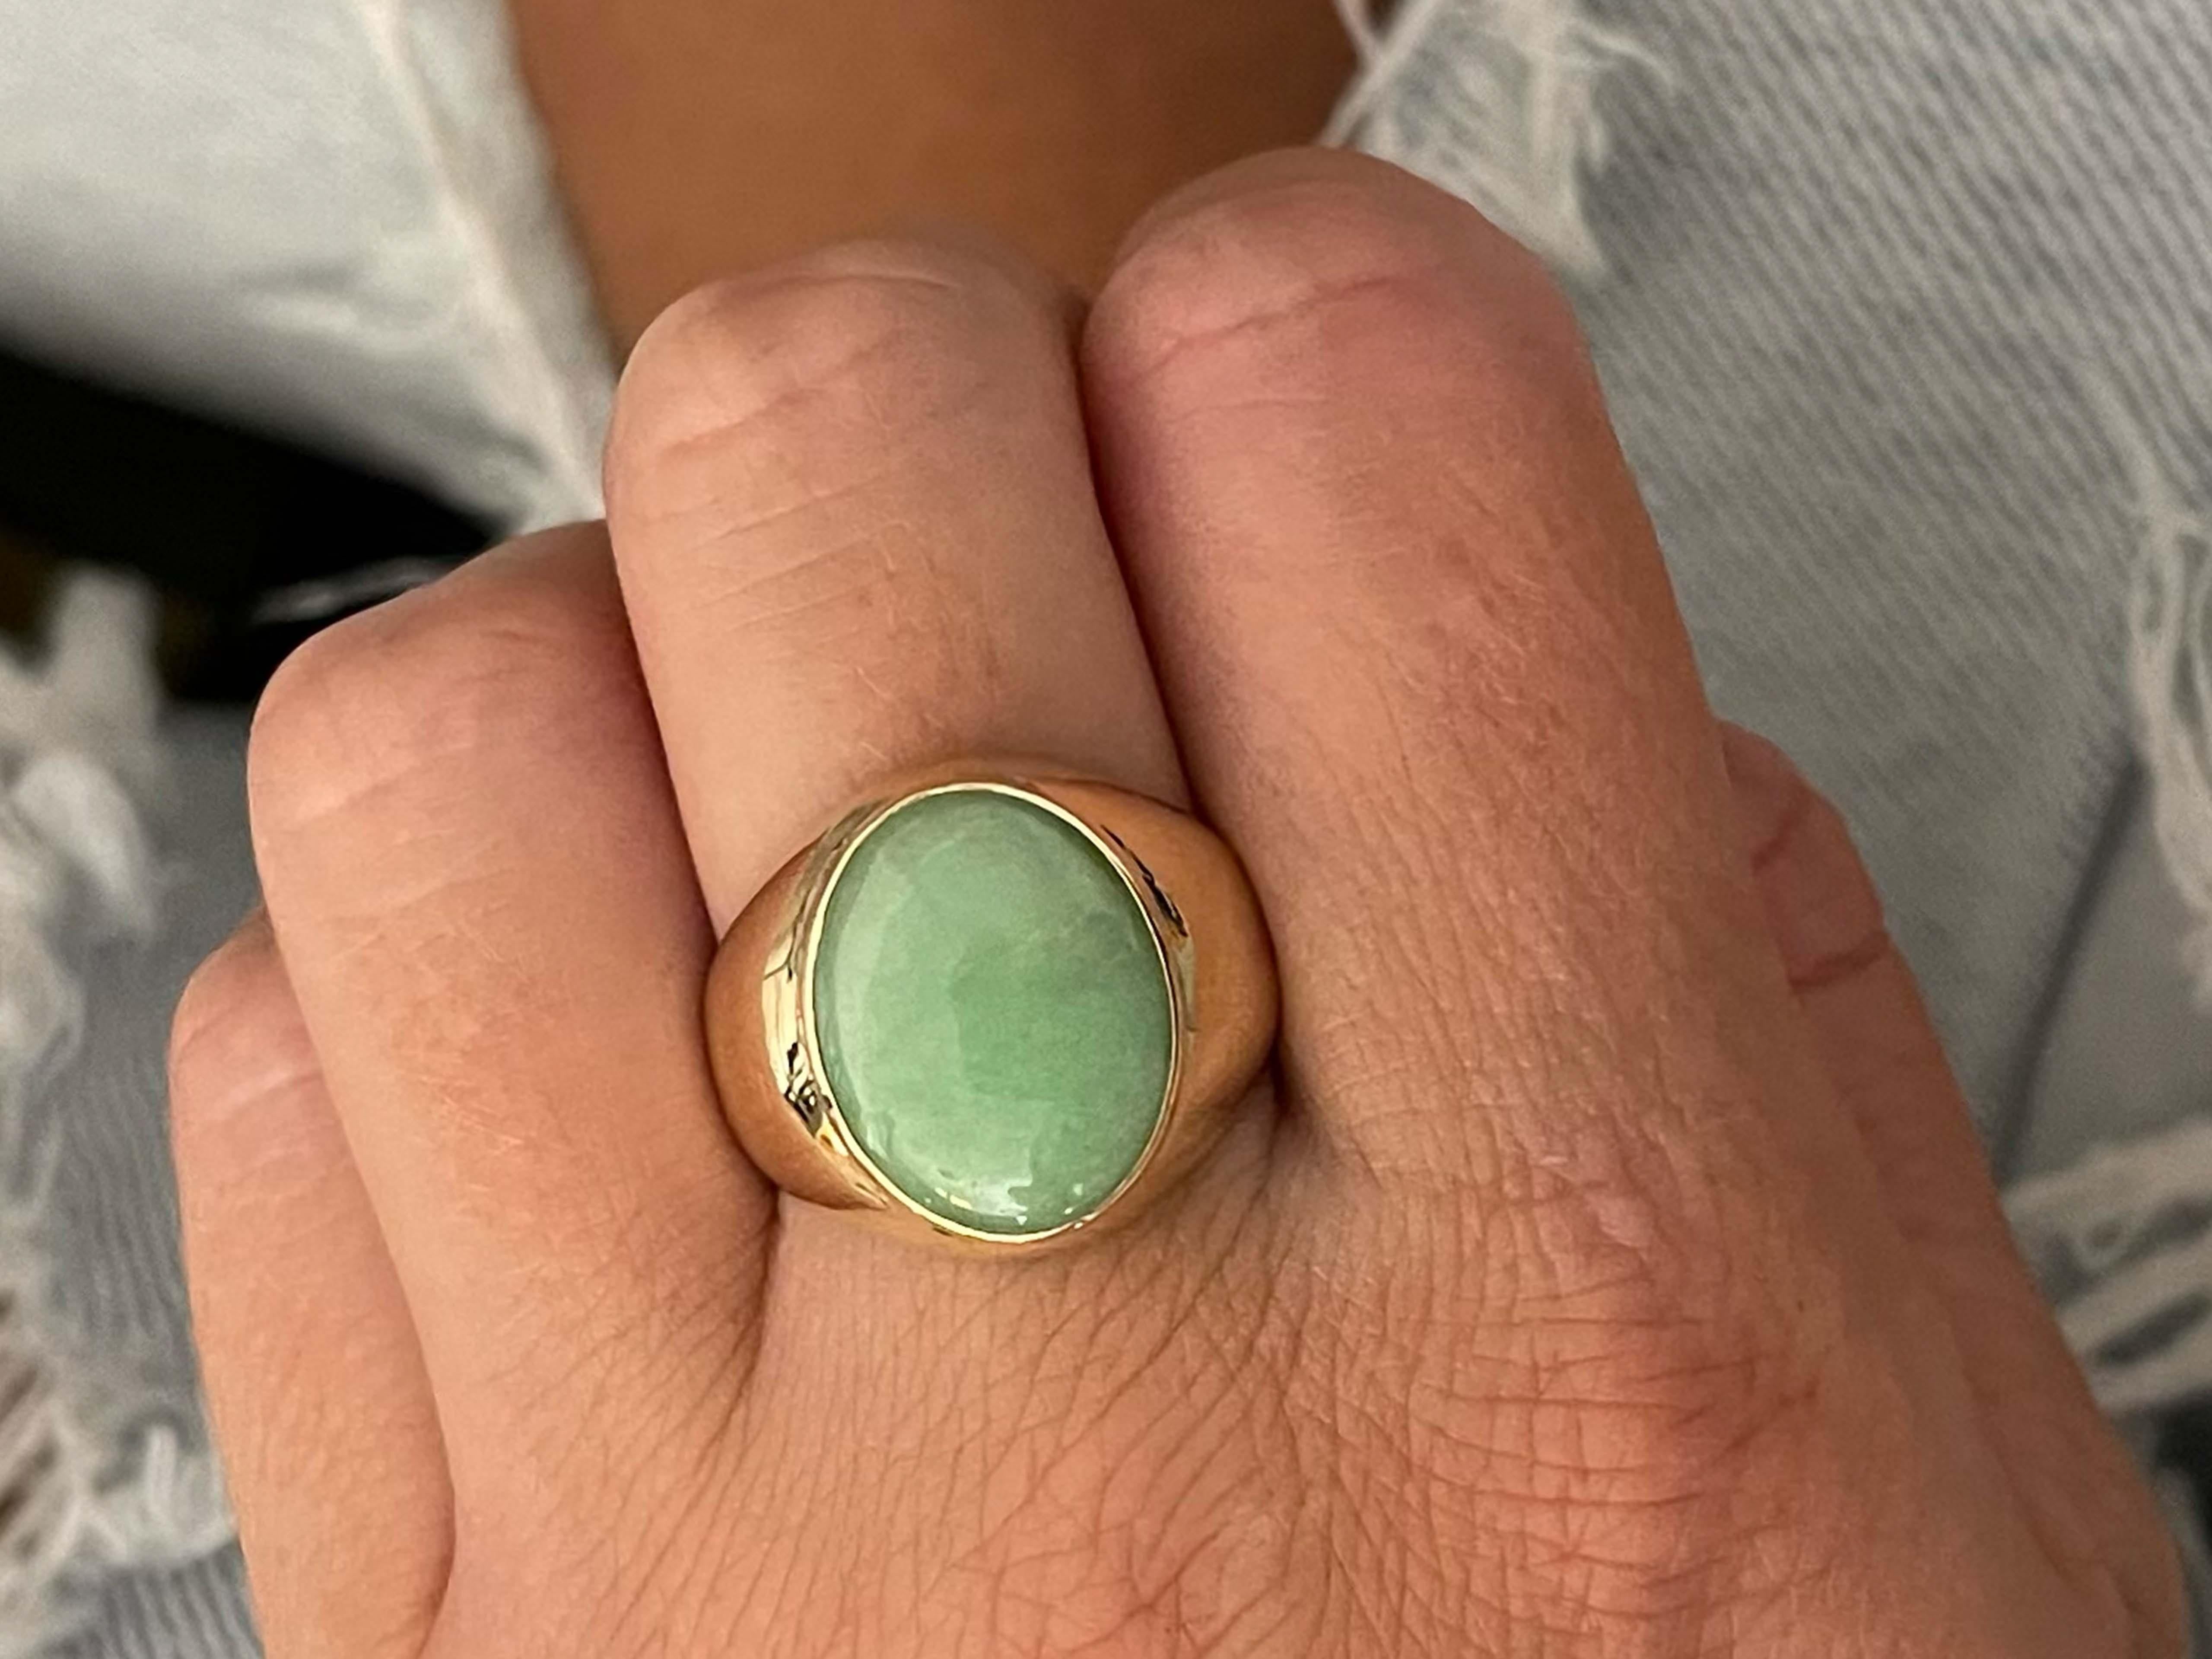 Item Specifications:

Metal: 14k Yellow Gold 

Style: Statement Ring

Ring Size: 9.25 (resizing available for a fee)

Total Weight: 6.8 Grams

Gemstone Specifications:

Center Gemstone: Jadeite Jade

Shape: Oval

Color: Green

Cut: Cabochon 

Jade